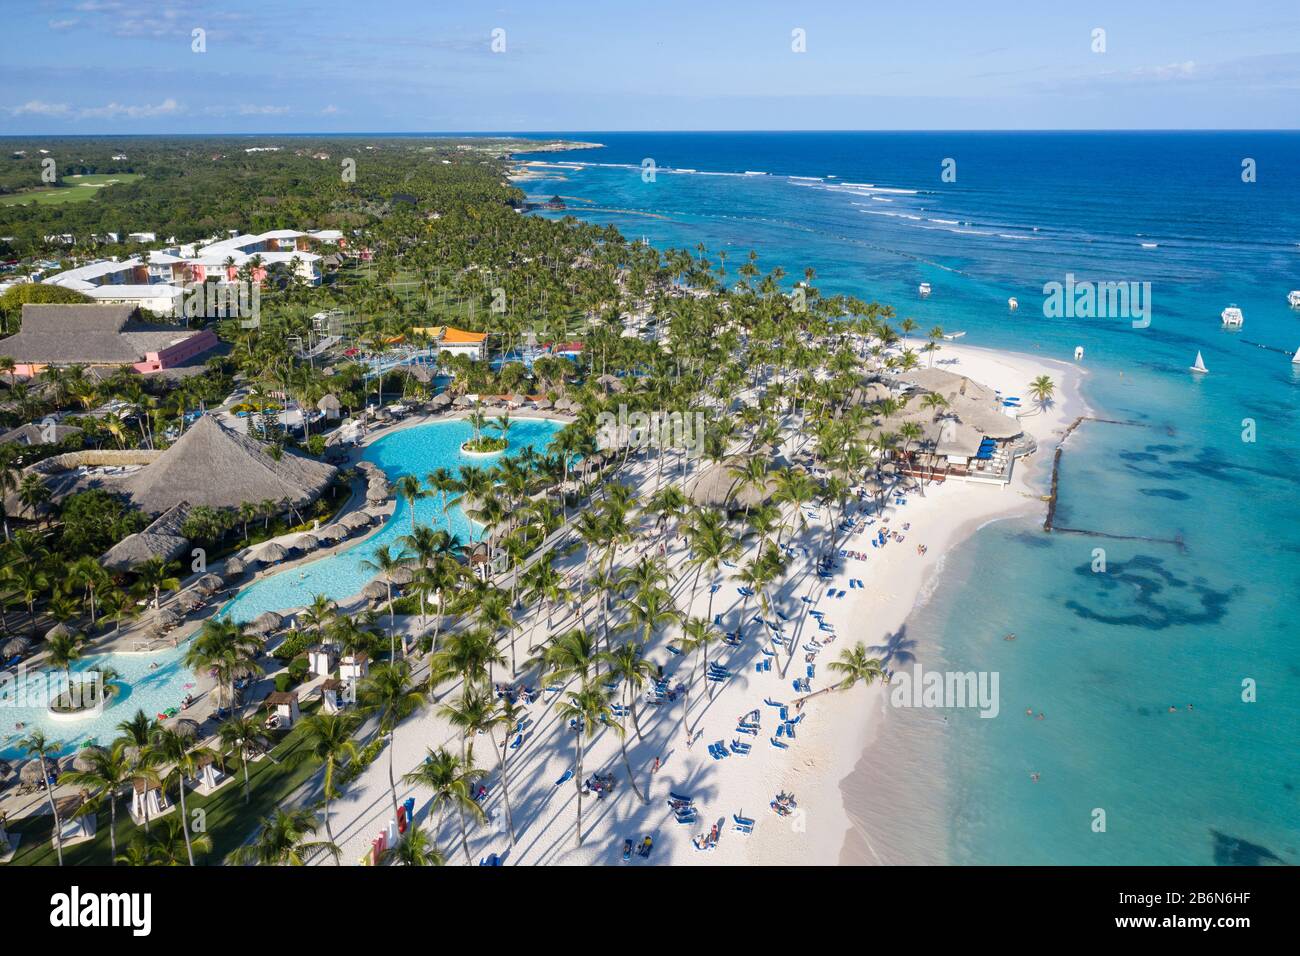 Aerial view of beautiful white sandy beach in Punta Cana, Dominican Republic Stock Photo